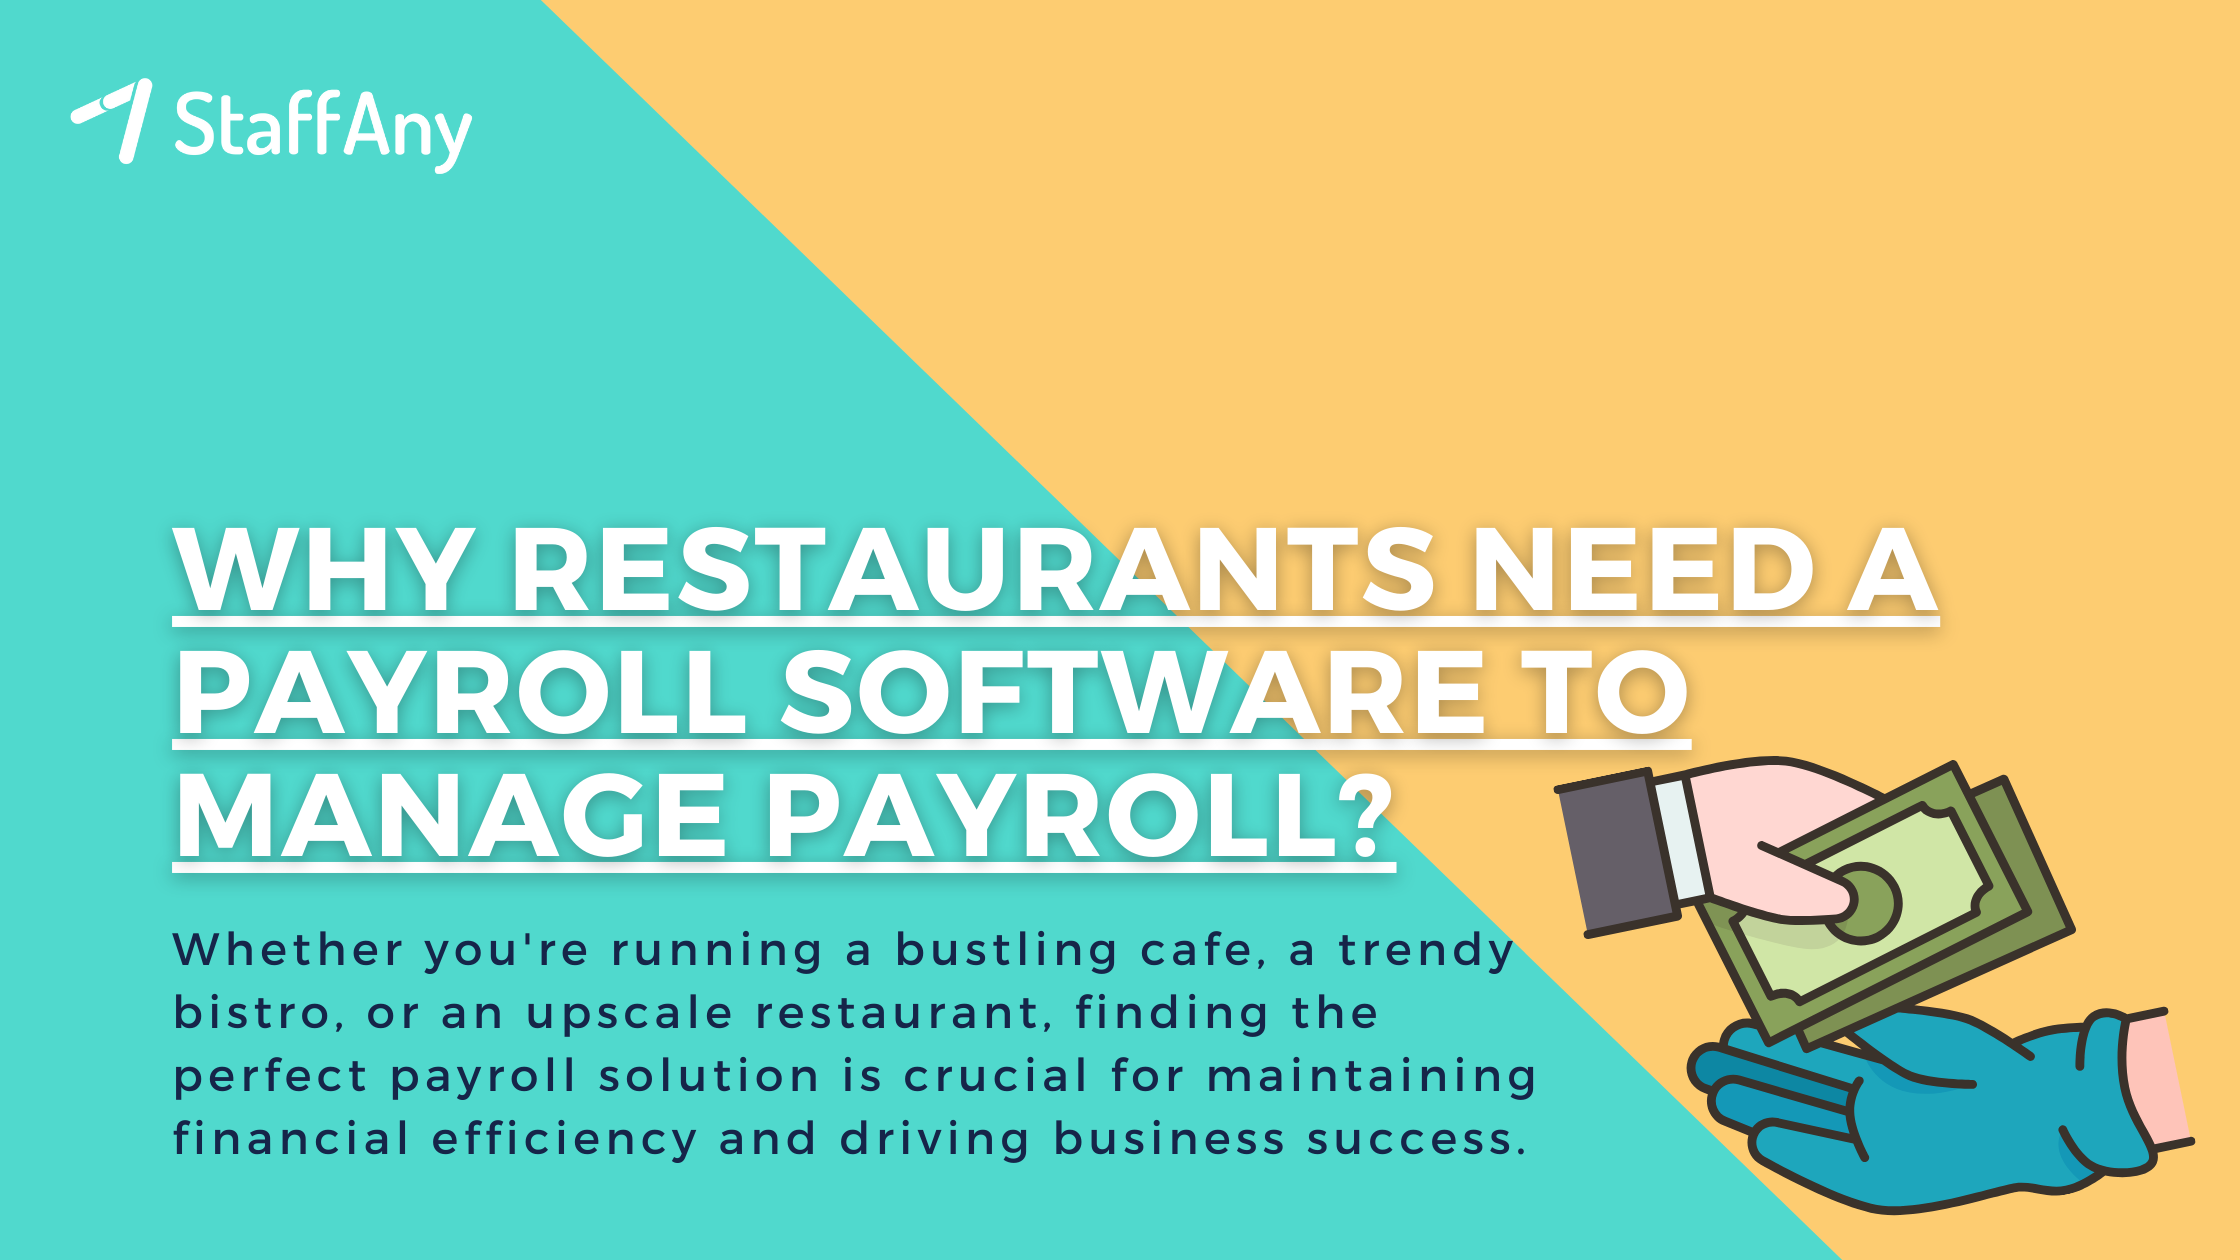 Why Do Restaurants Need a Payroll Software to Manage Payroll?